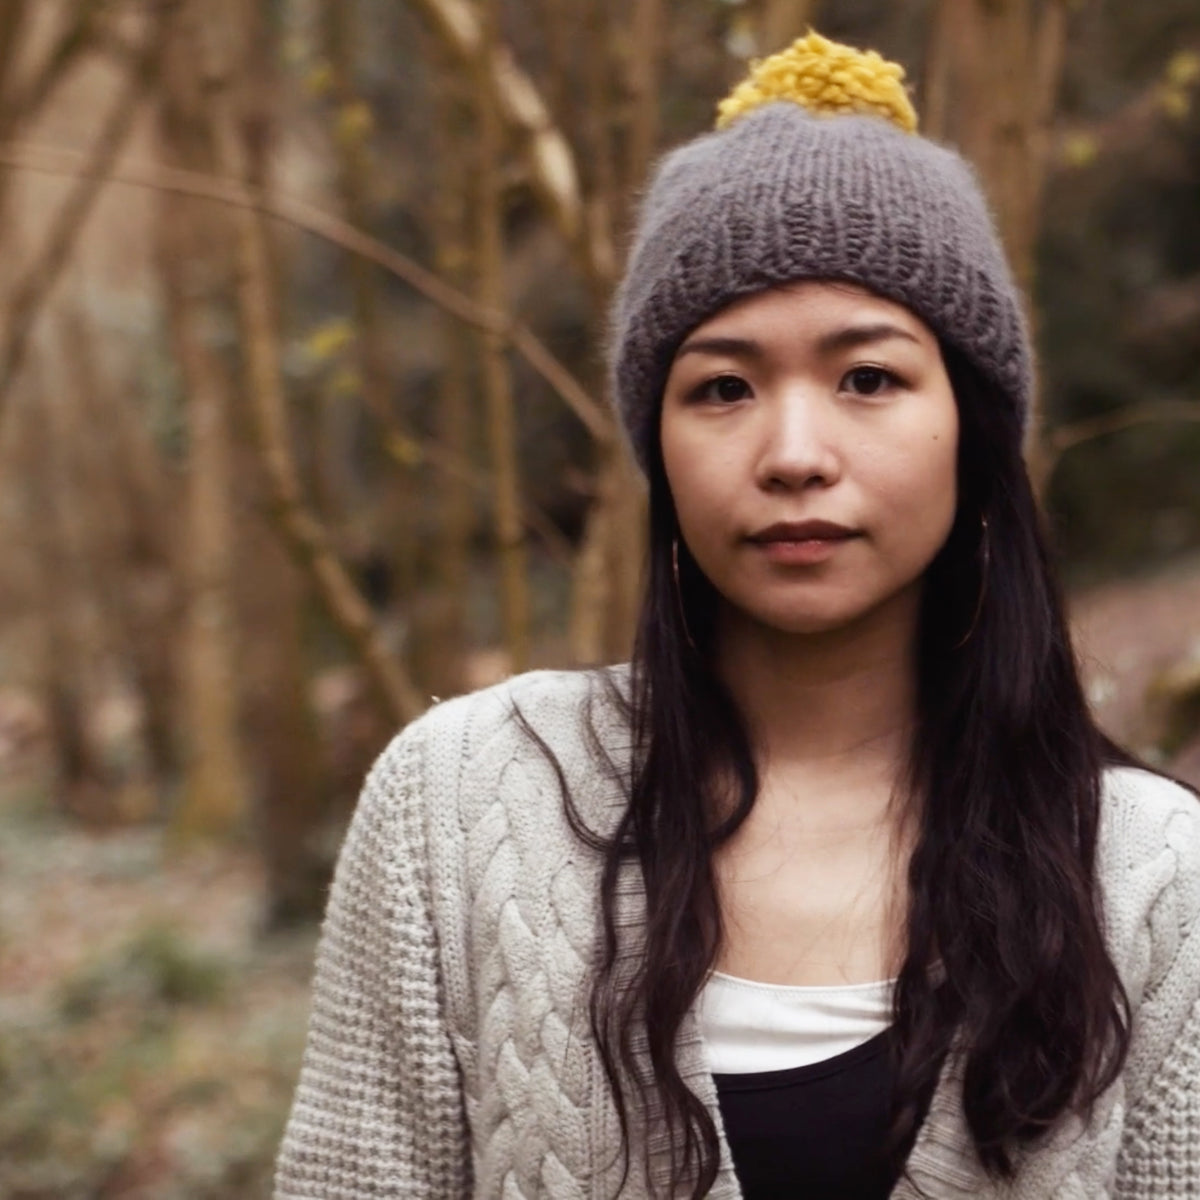 Charcoal & Mustard Woolly Knitted Beanie - IndependentBoutique.com